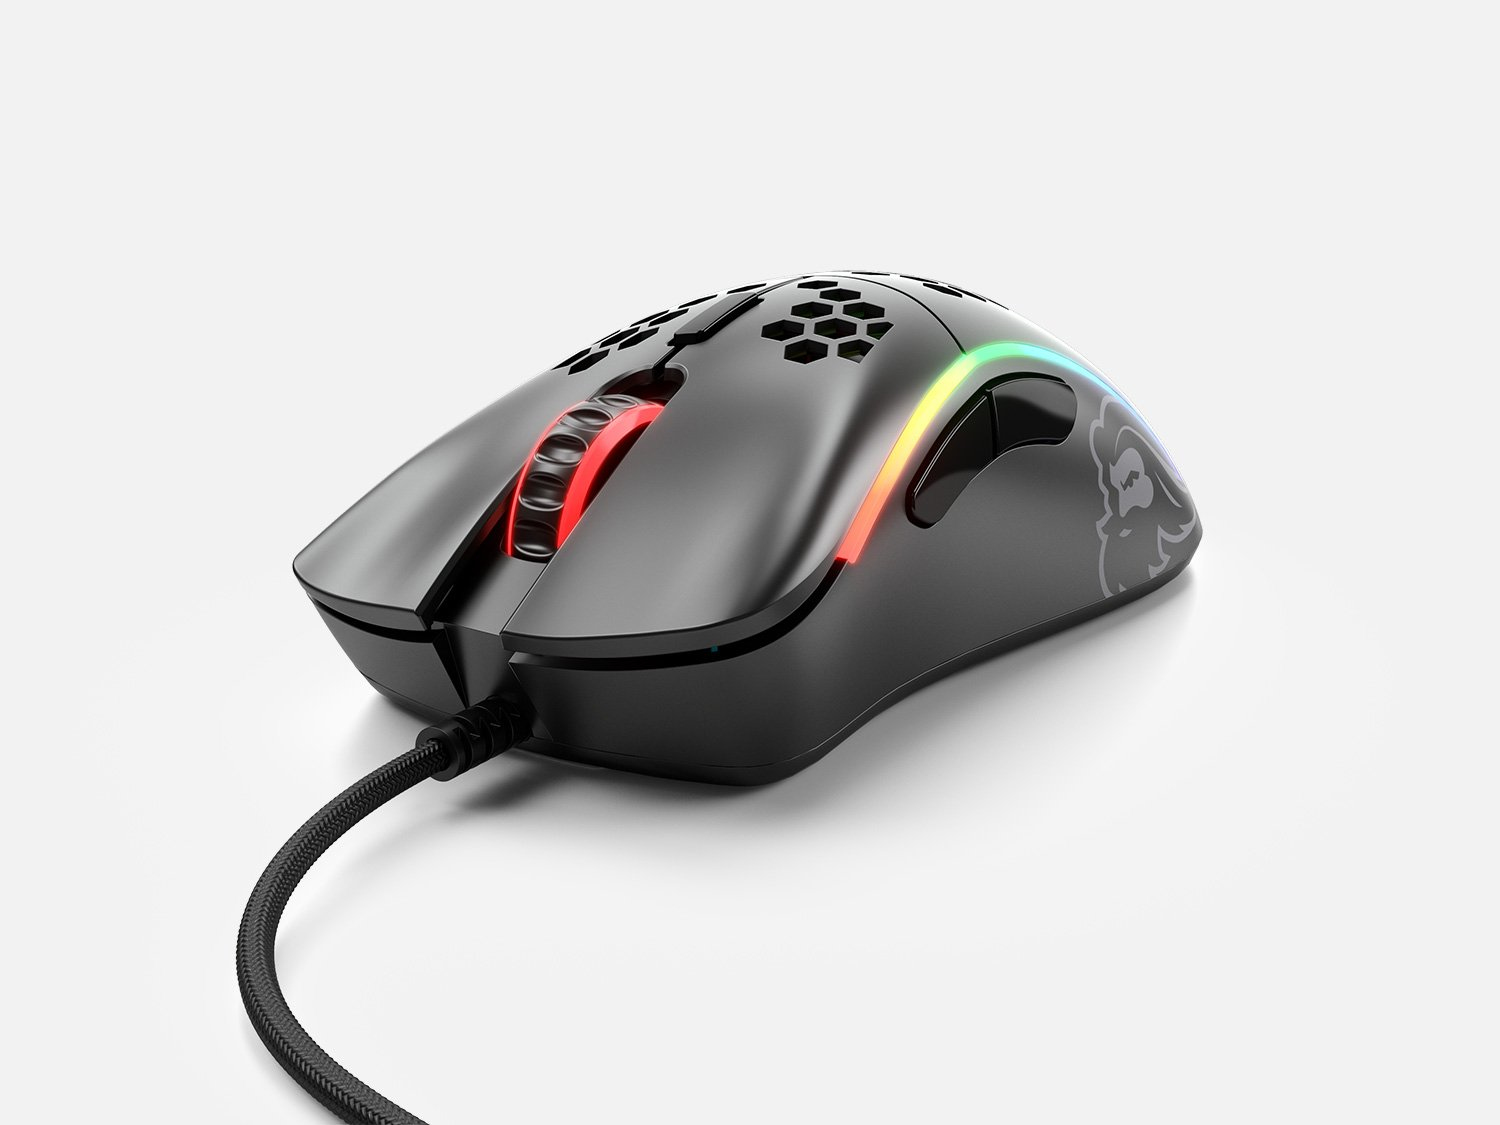 GLO-MS-DM-MB GLORIOUS PC GAMING RACE Model D- USB RGB Optical Gaming Mouse - Matte Black (GLO-MS-DM-MB)